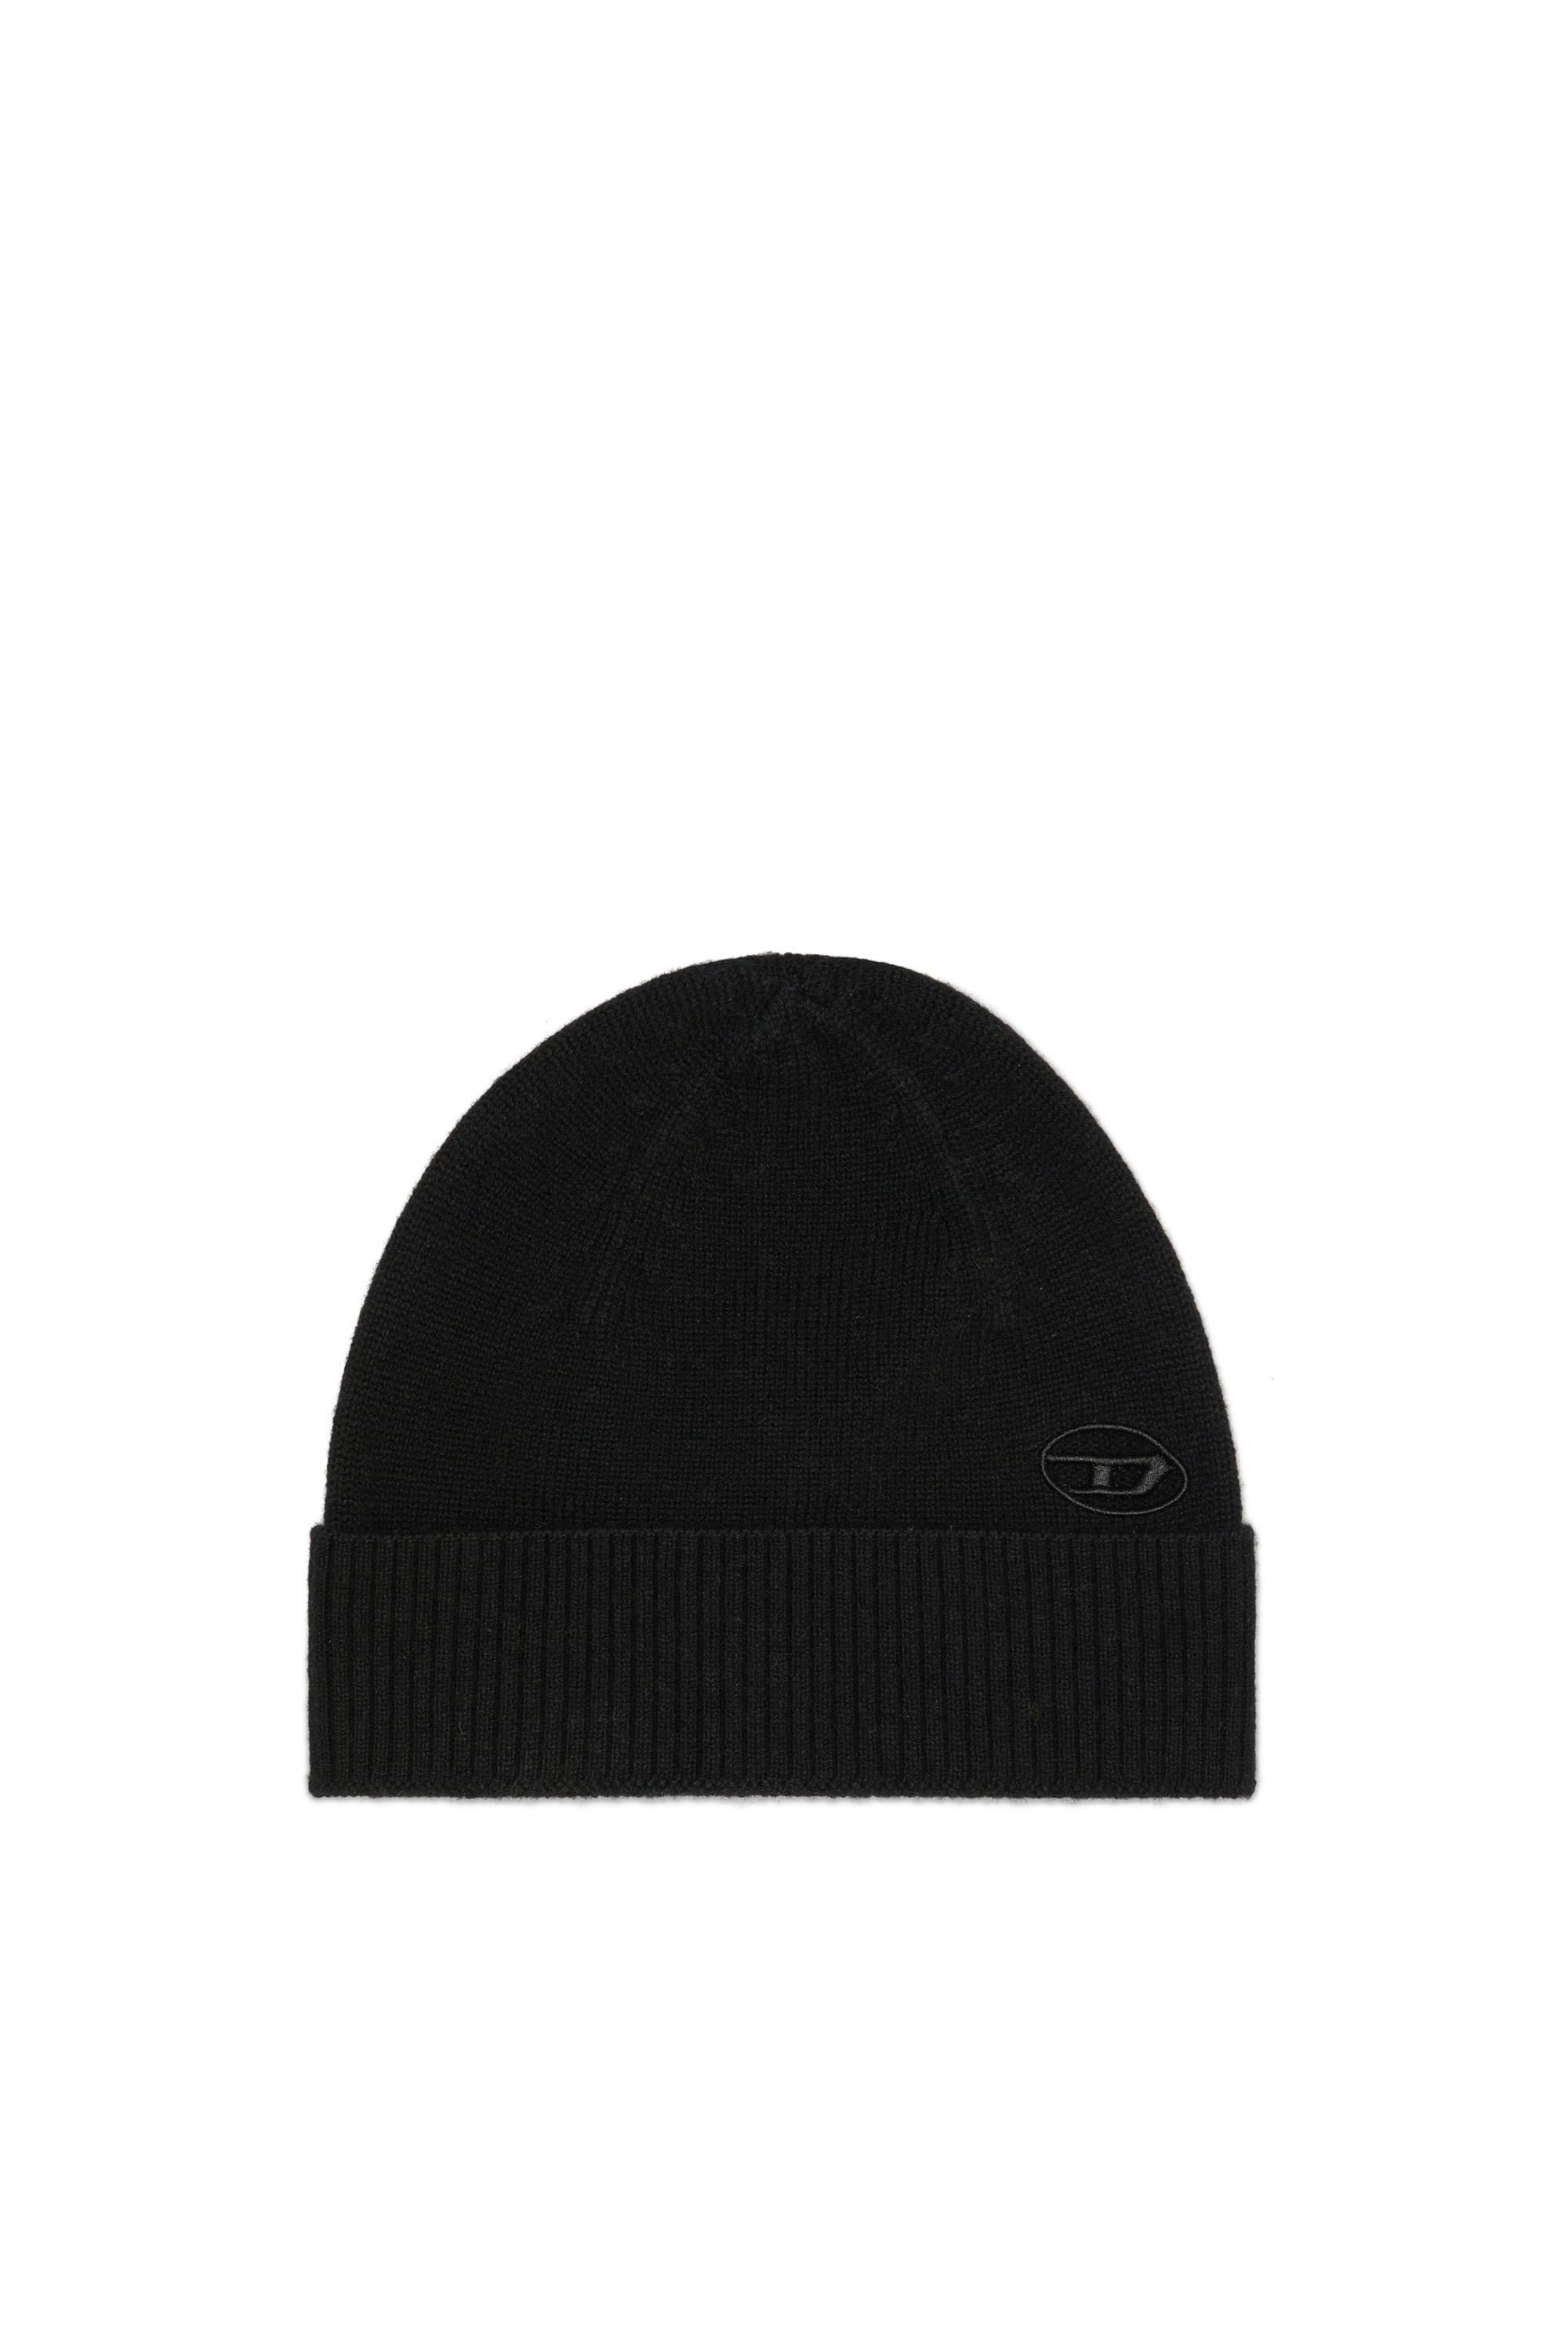 Diesel - Beanie with embroidered Oval D patch - Knit caps - Unisex - Black